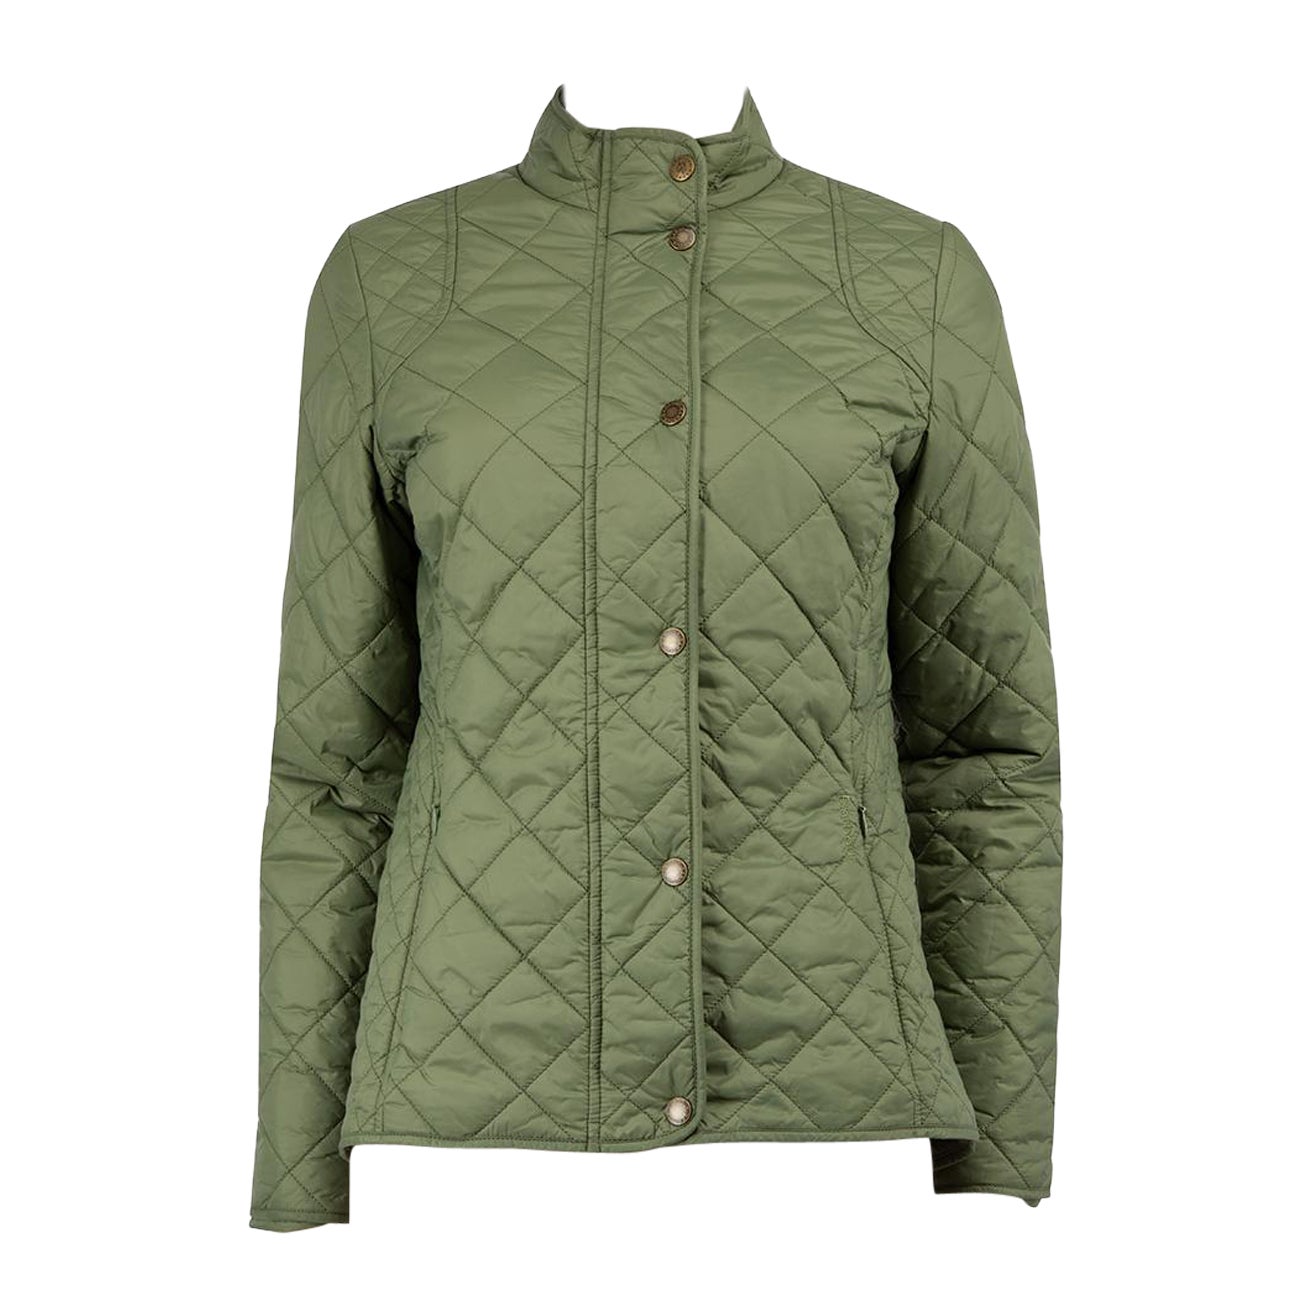 Barbour Green Quilted Jacket Size M For Sale